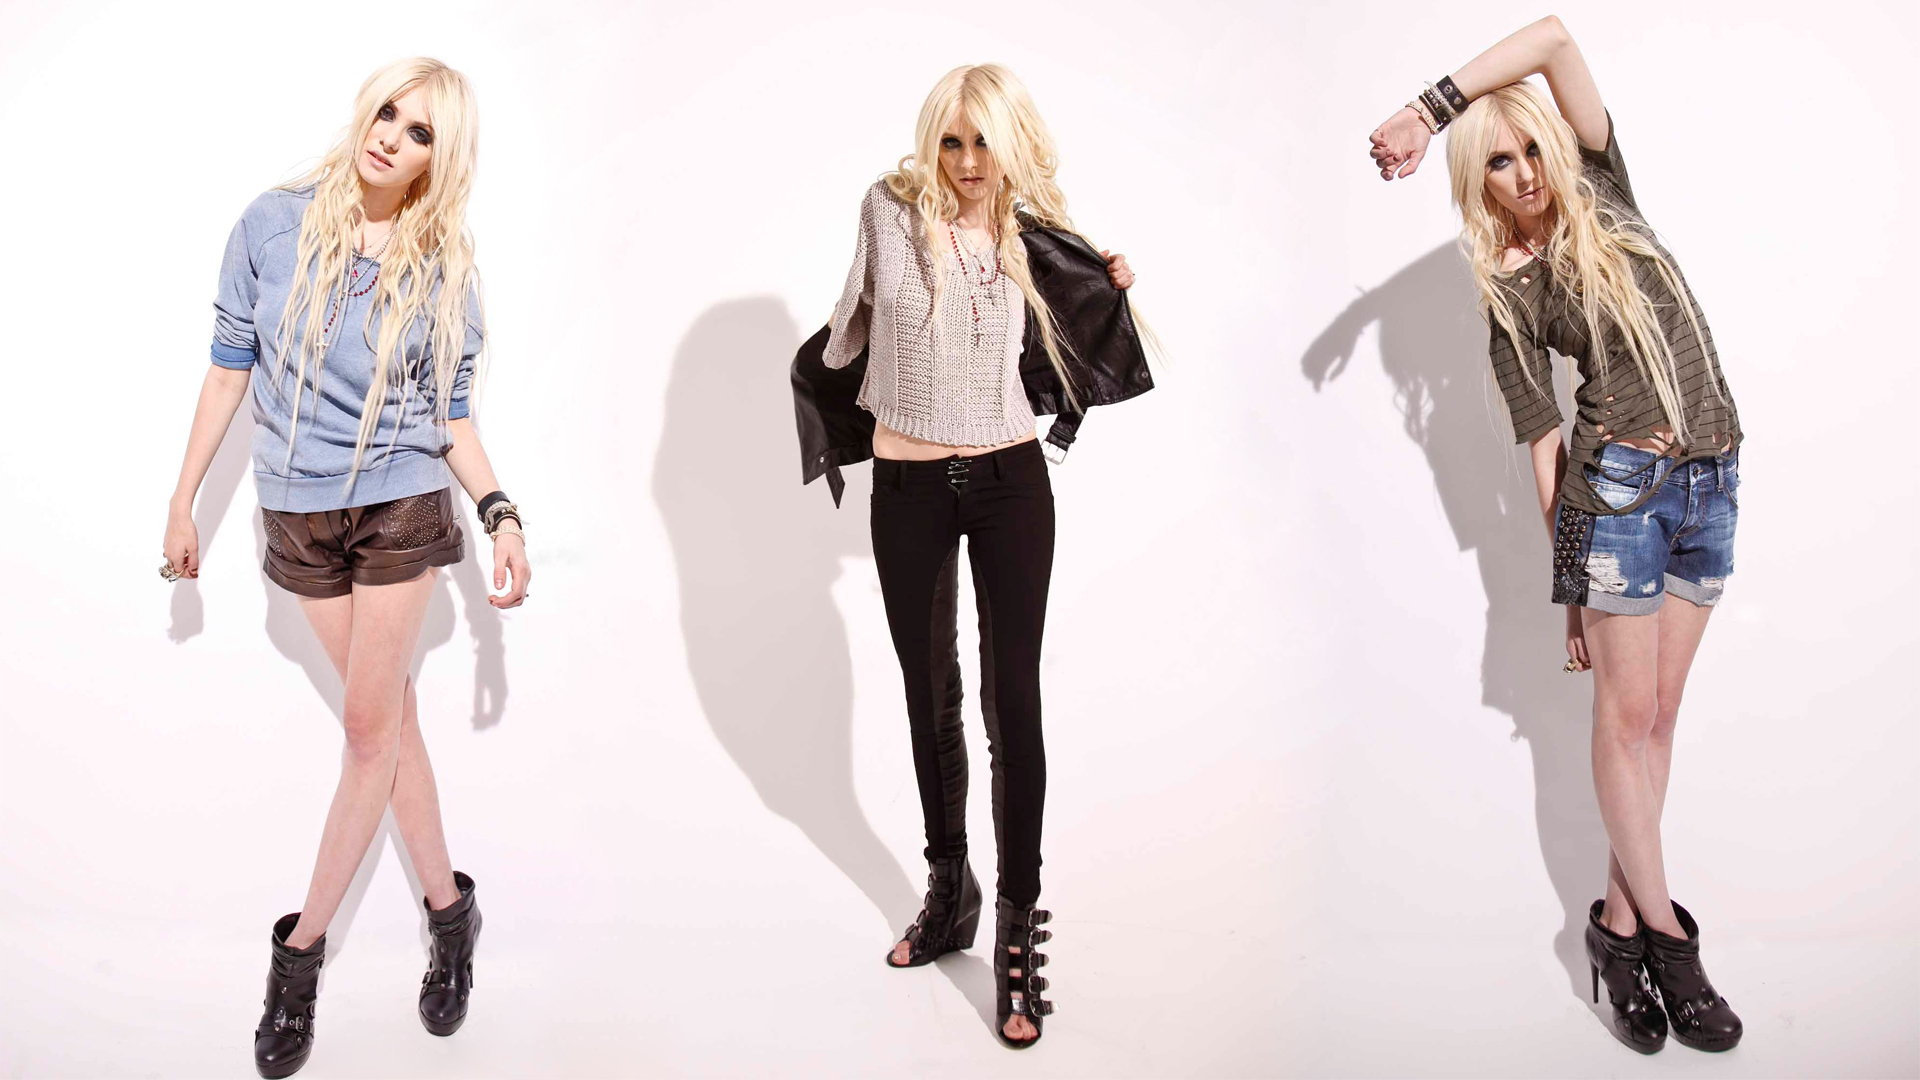 The Pretty Reckless Image Taylor Momsen Wallpaper Photos